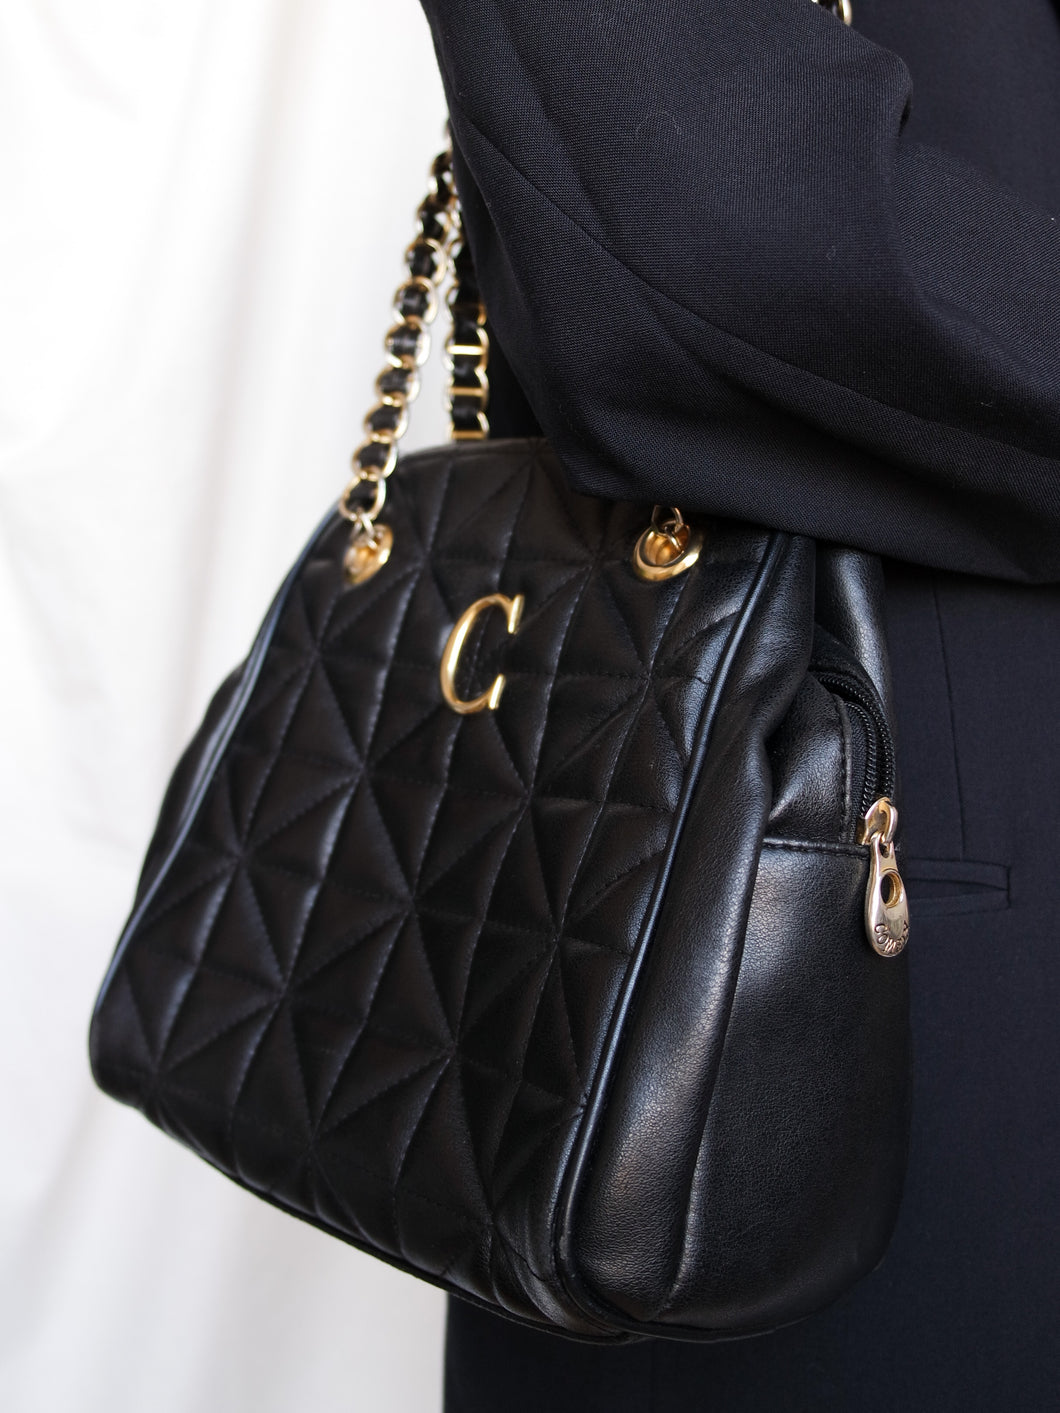 Black quilted bag